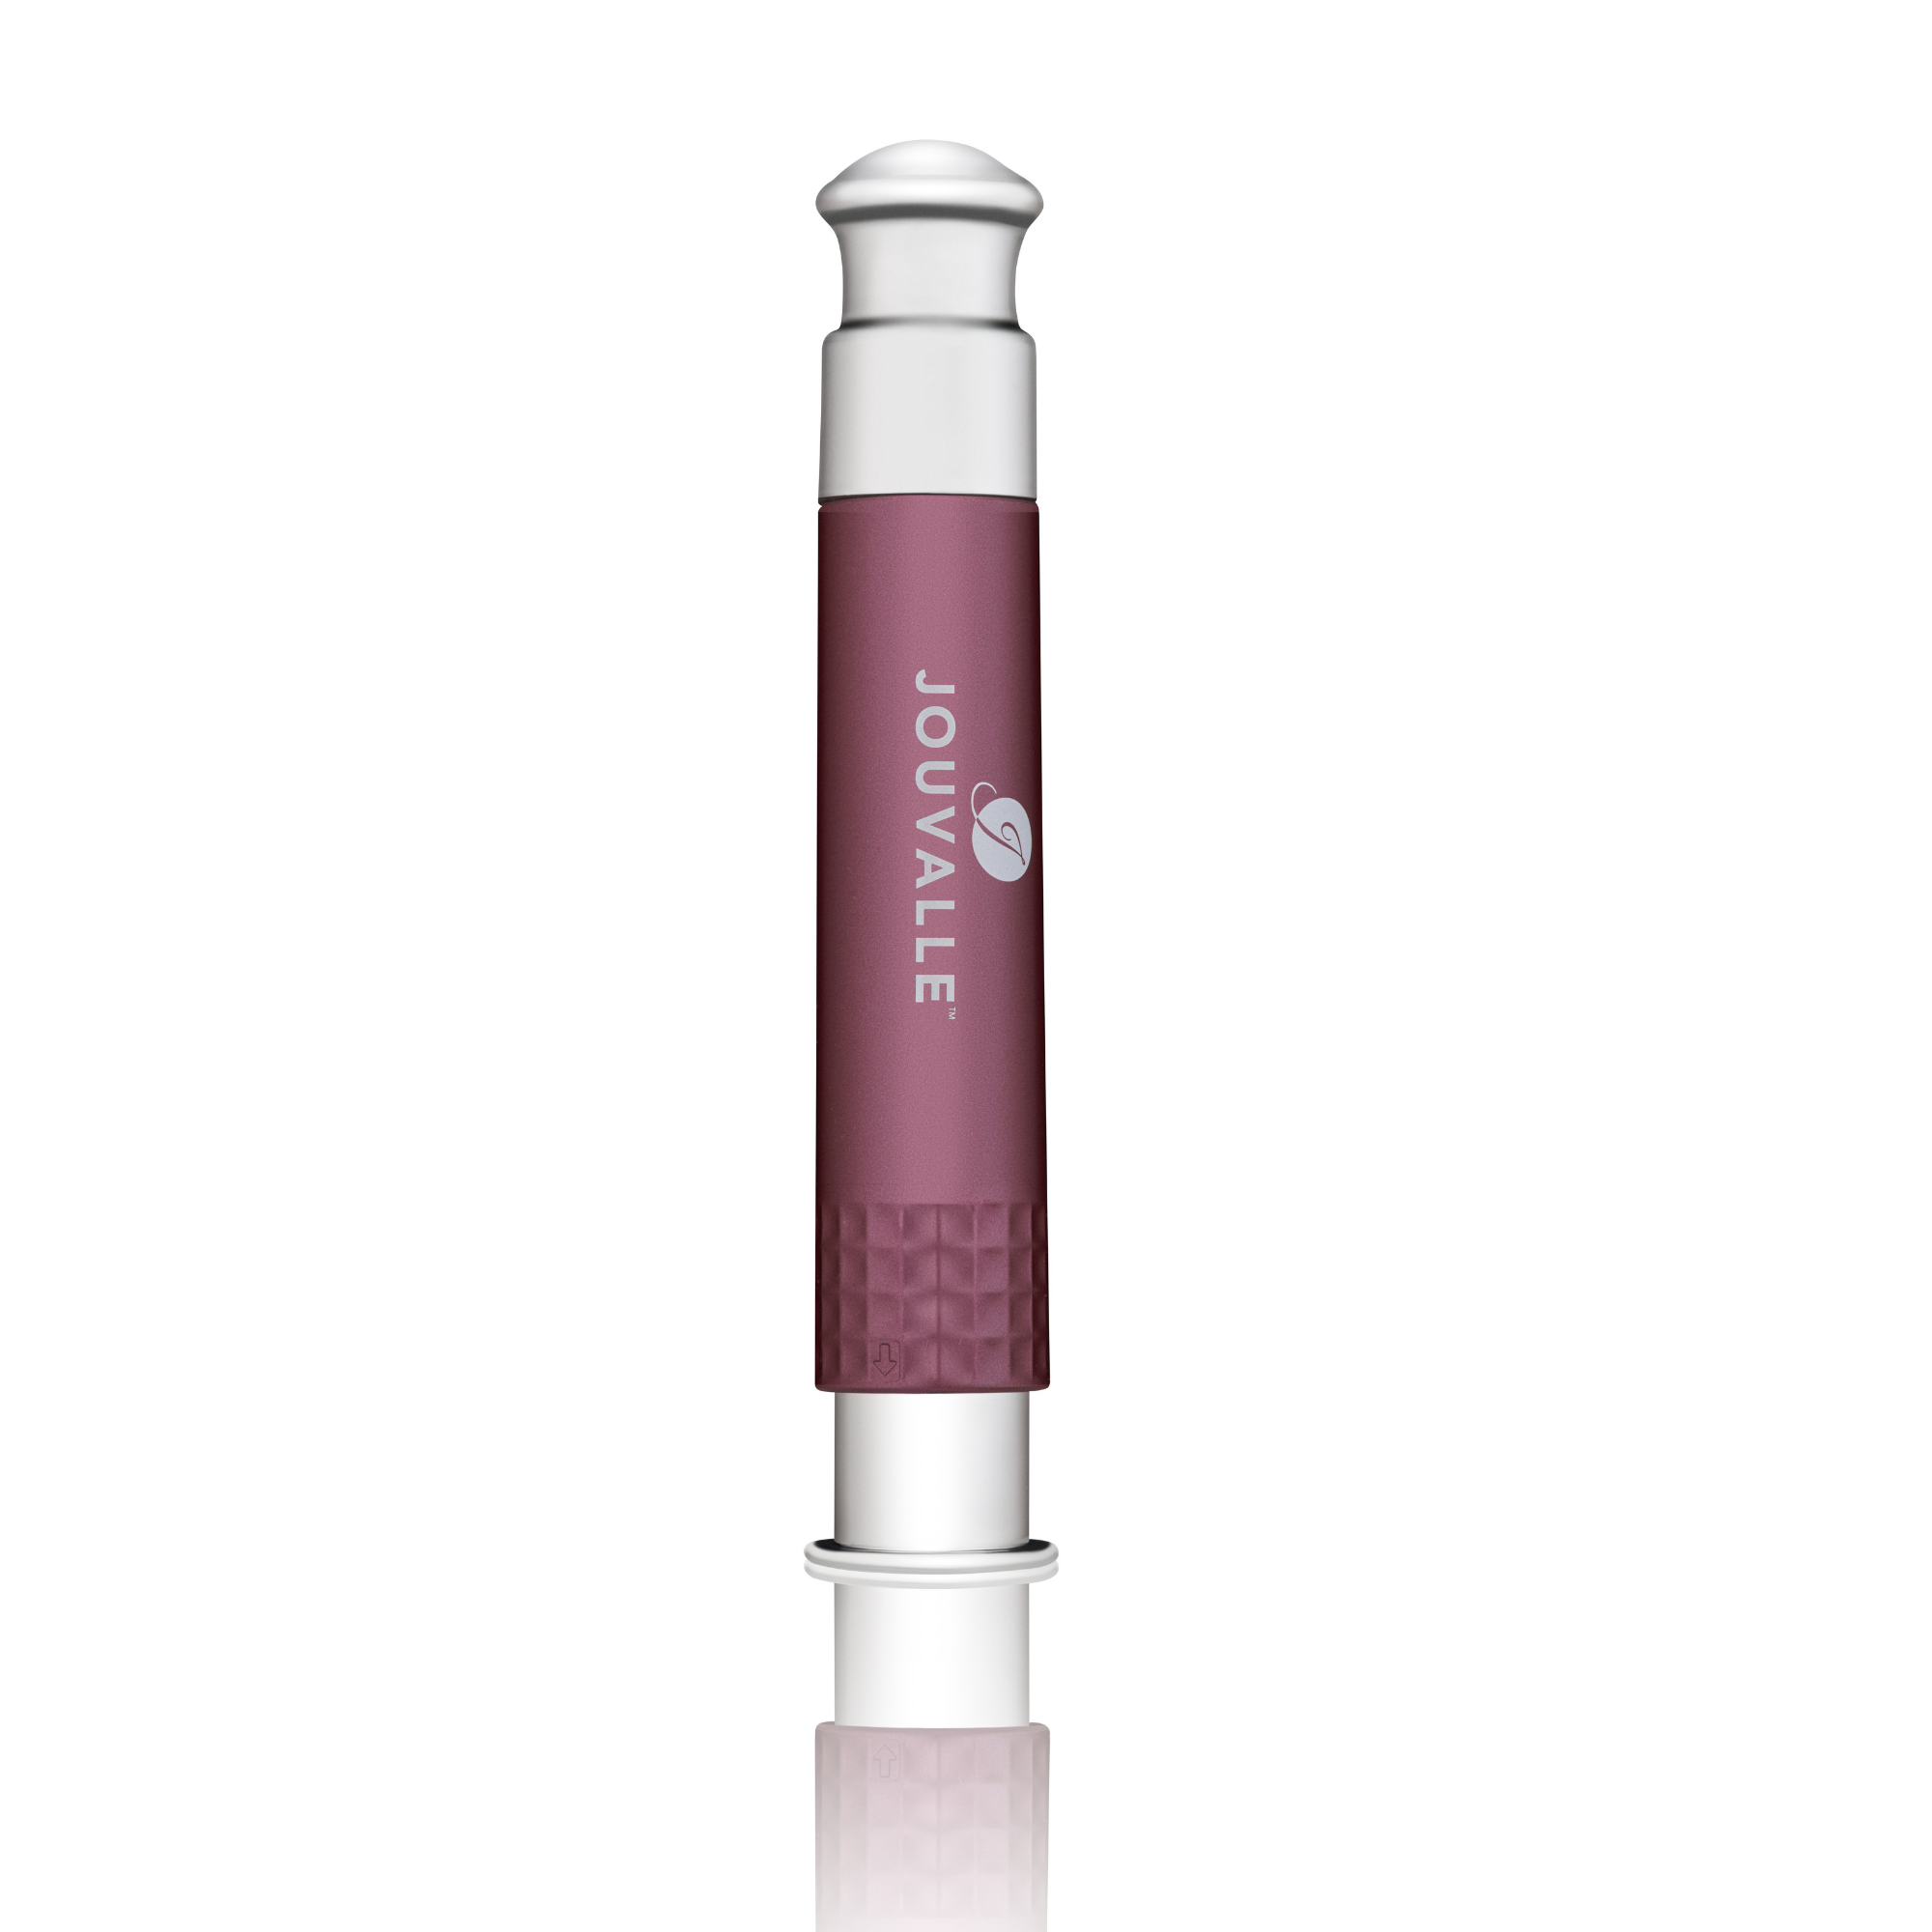 Wrinkle & Puffiness Solution - Acai Stem Cells & Cucumber